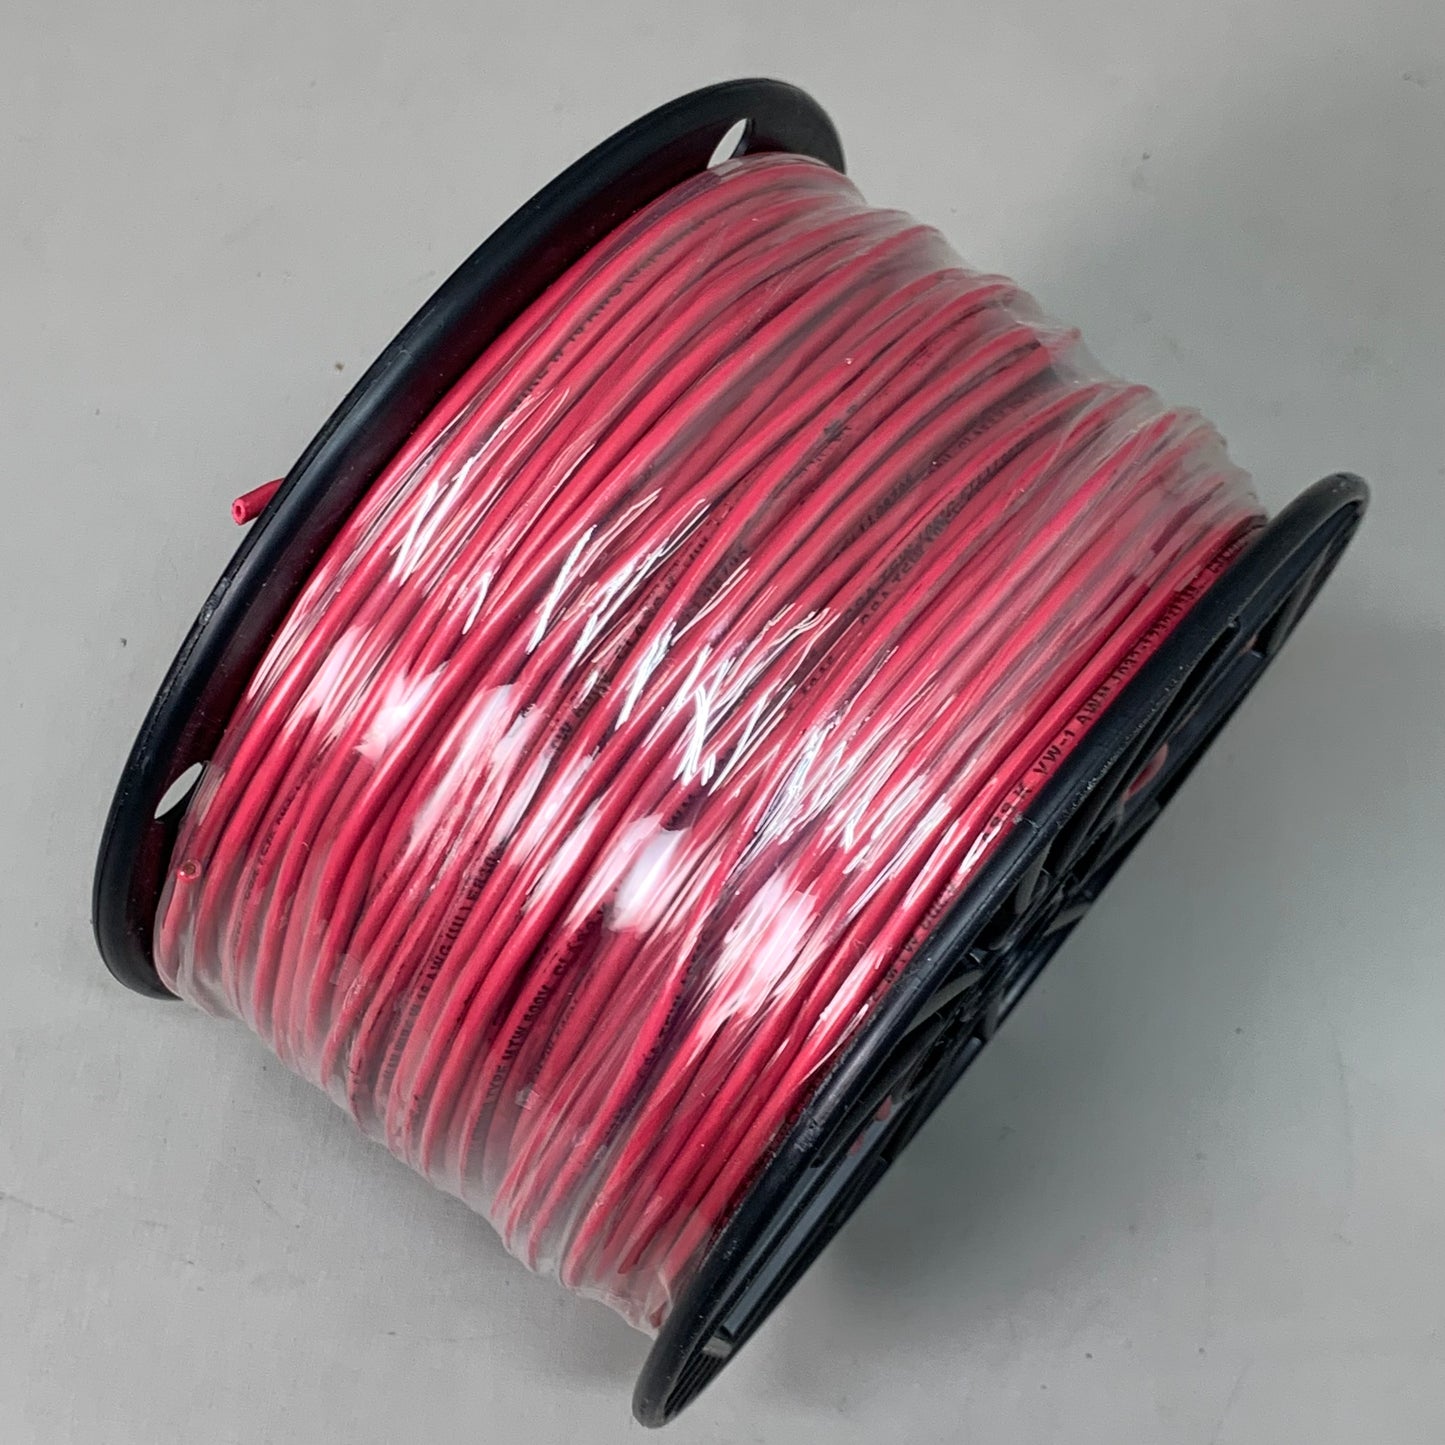 AWM Style 1032 500 FT 16 AWG Appliance Wire 26 Strand Red 16MT31 (New)